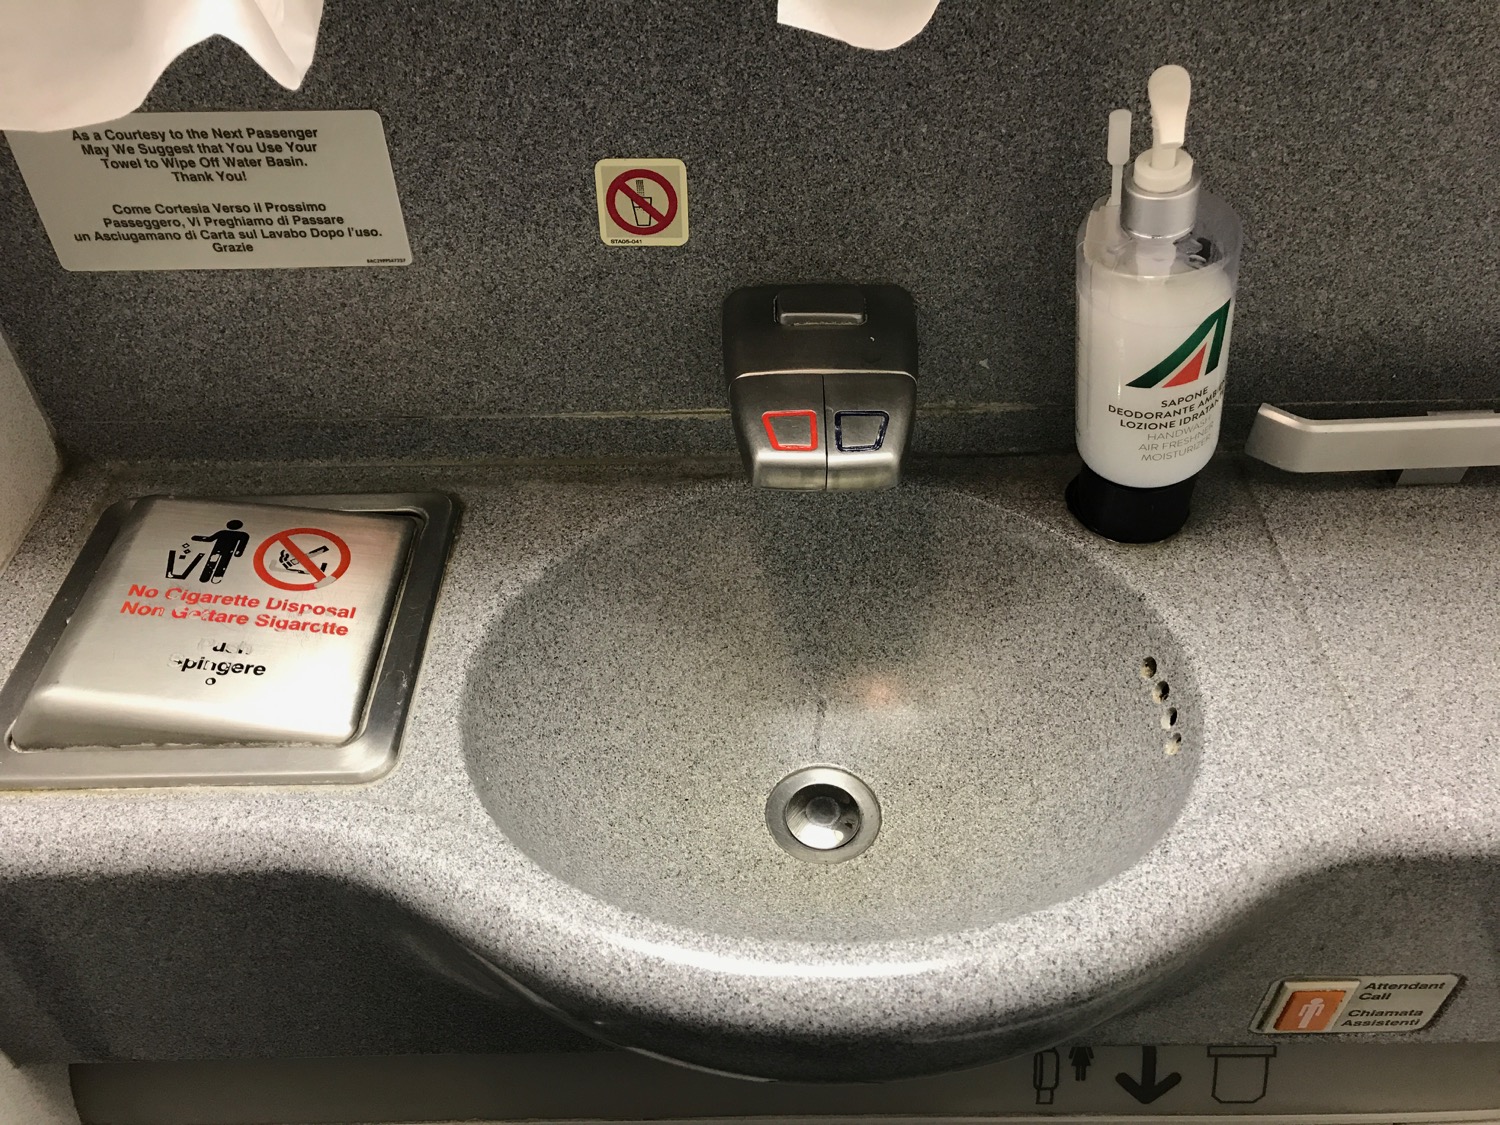 a sink with a bottle of liquid on it